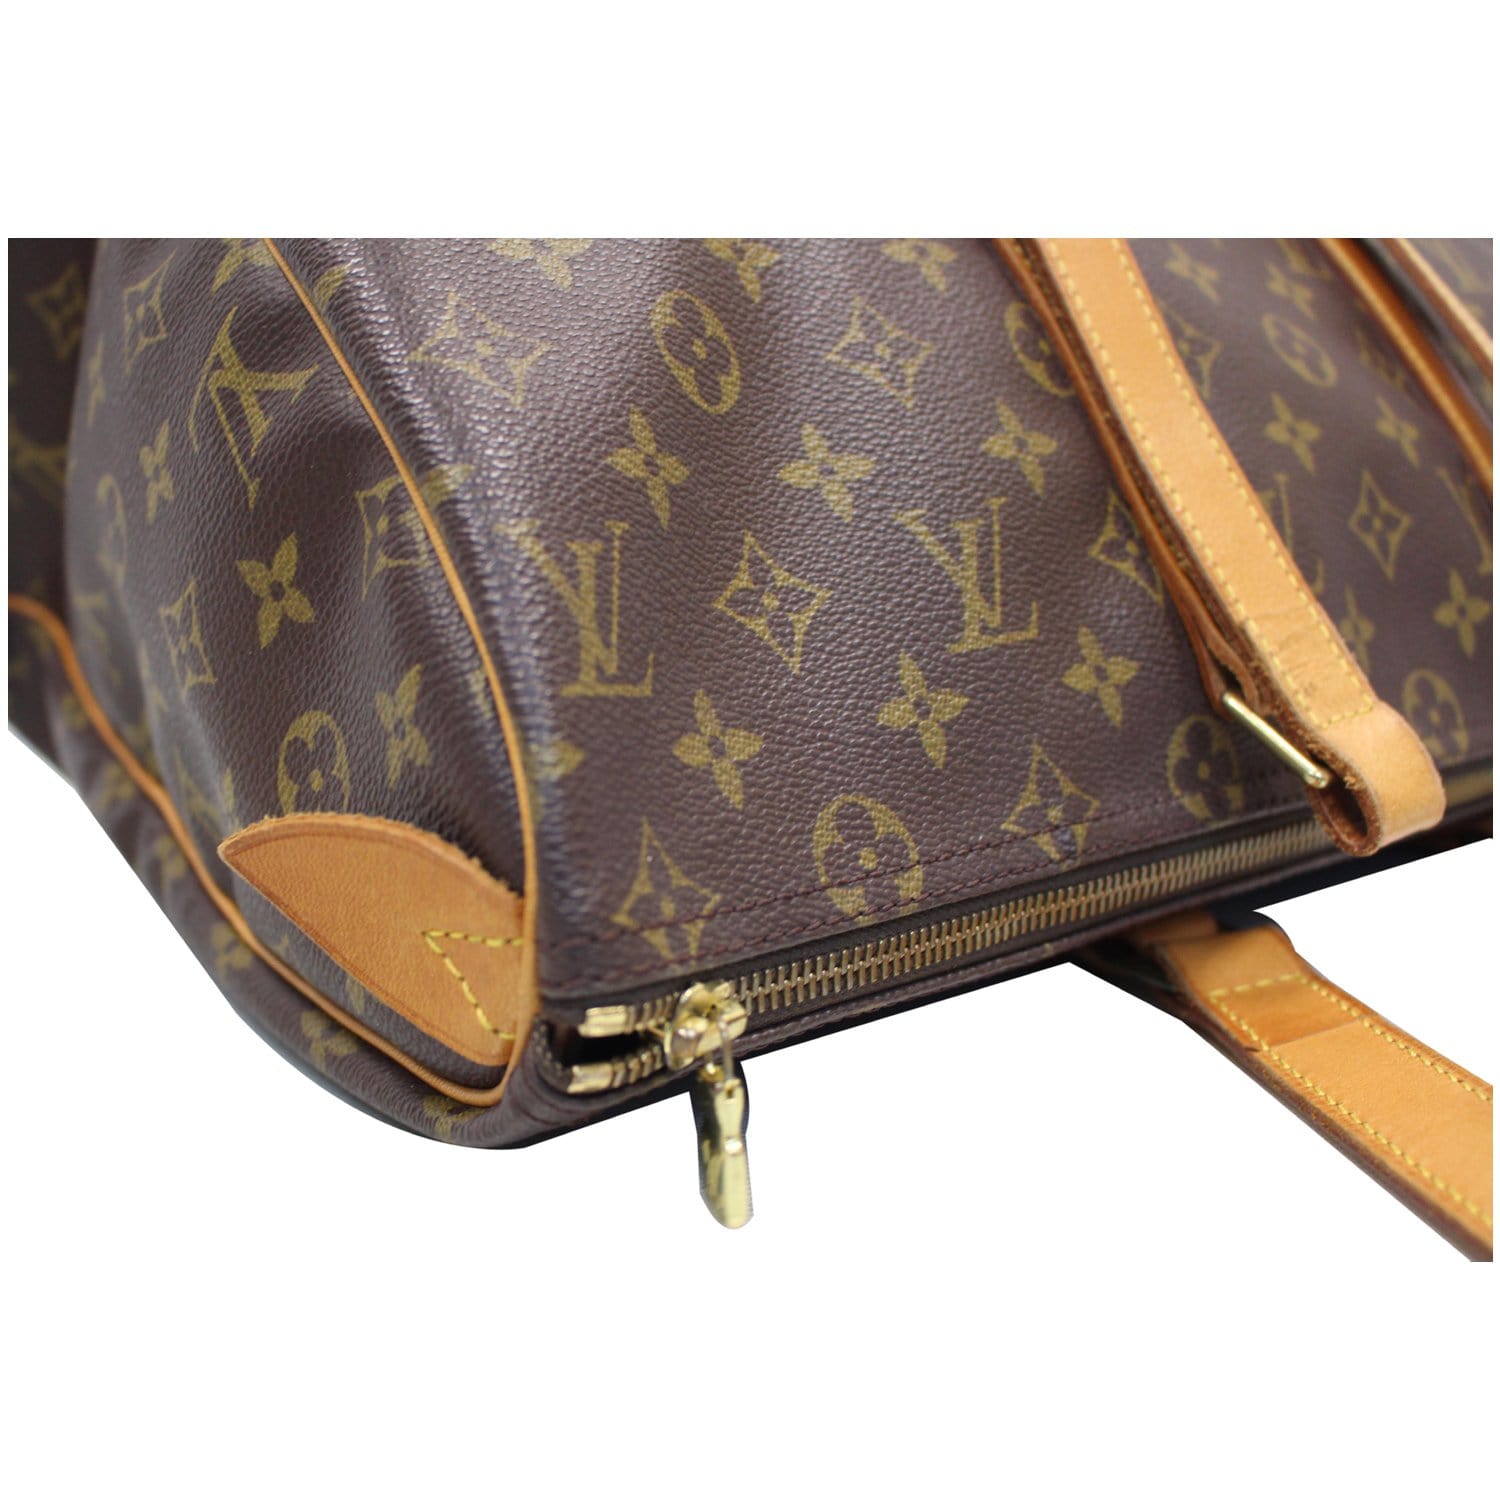 Authentic Louis Vuitton Flanerie 45 Tote Weekend Bag